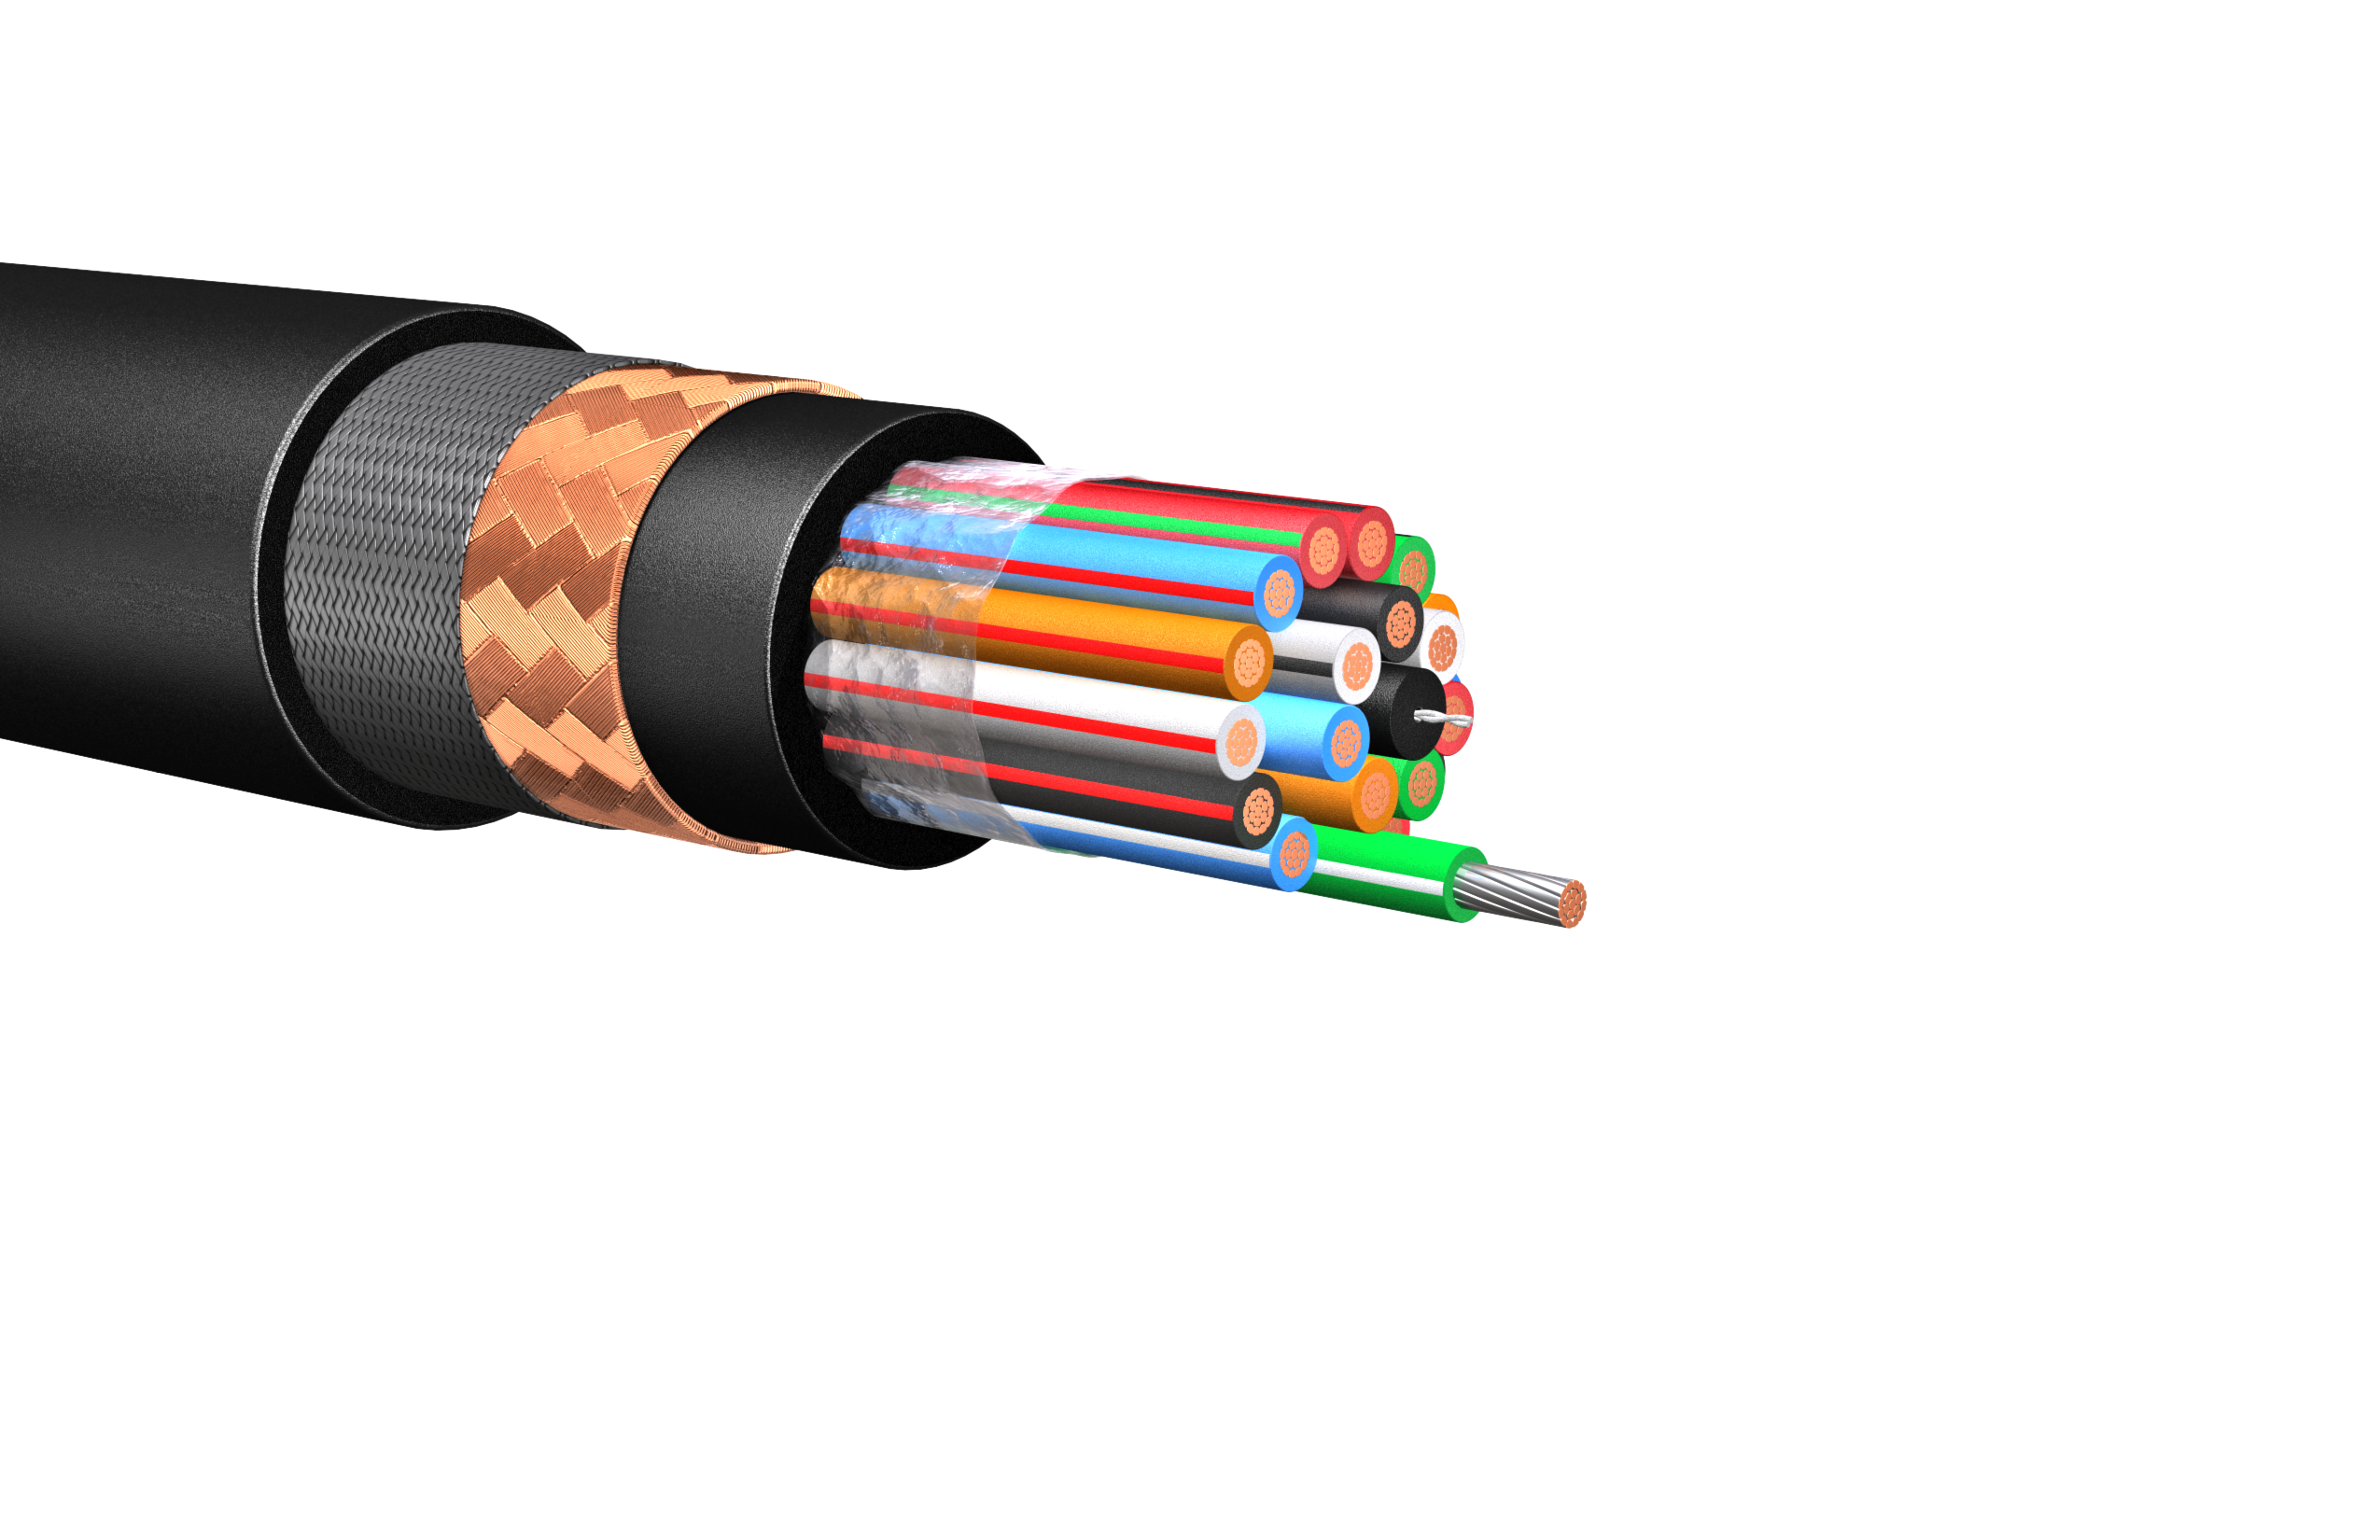 HW278: 600V/1kV Multi-Conductor Control Cable, Armored & Sheathed